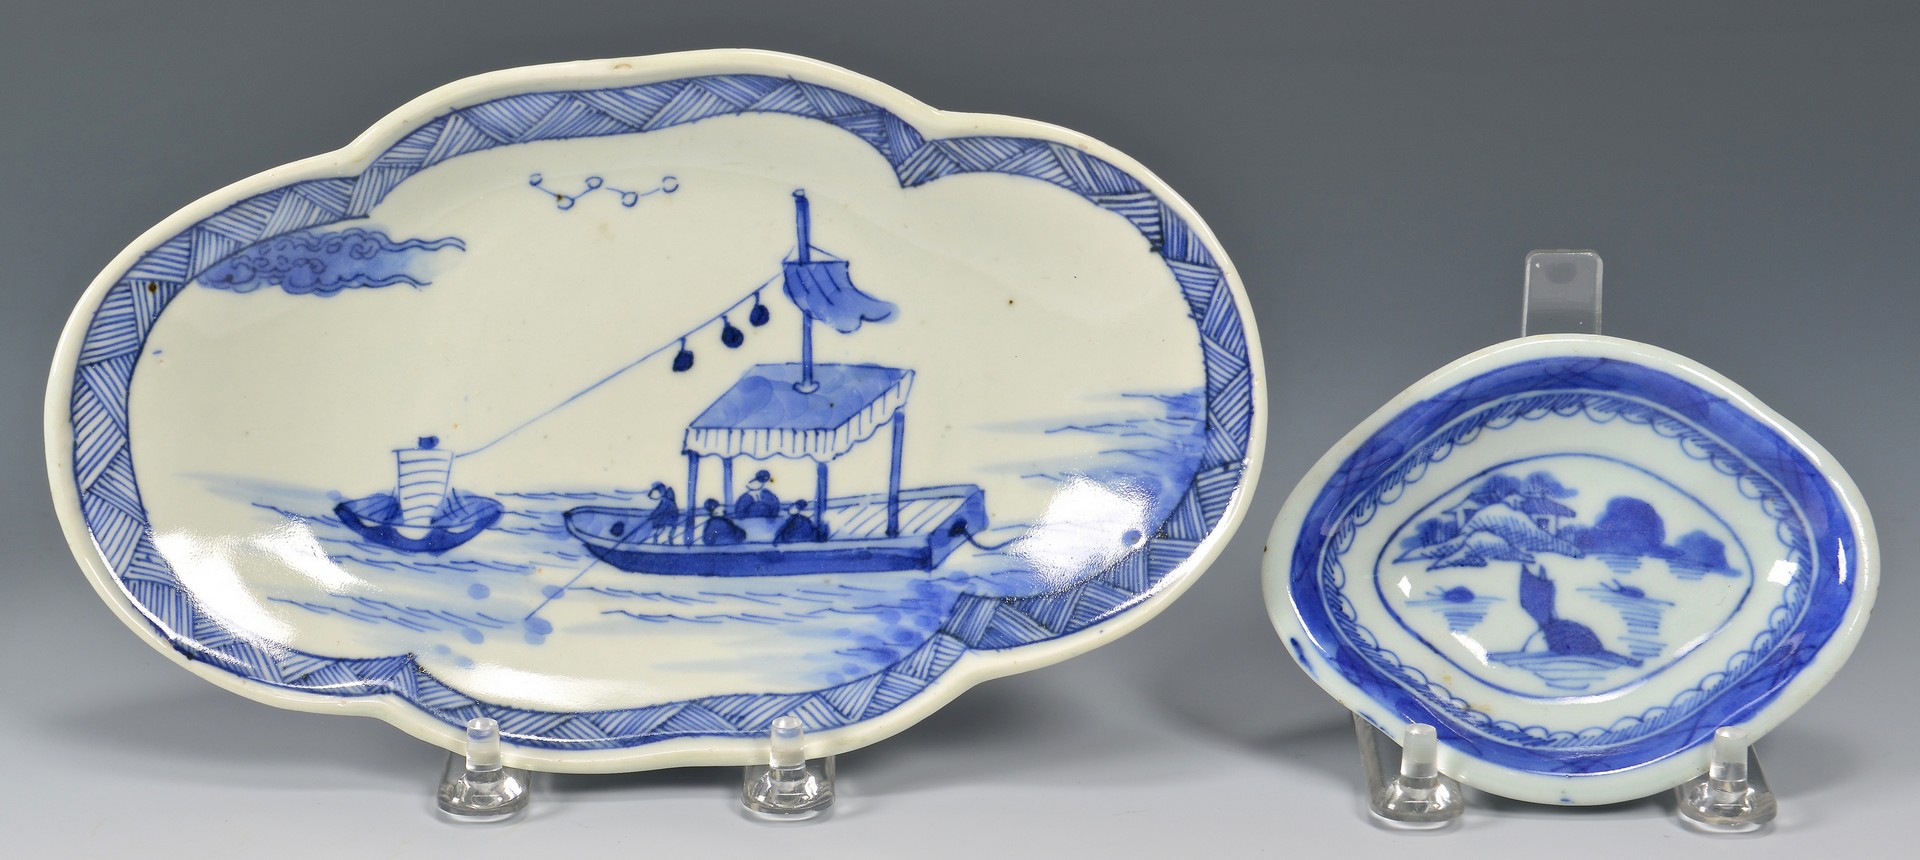 Lot 22: 5 Chinese Blue and White Porcelain Items